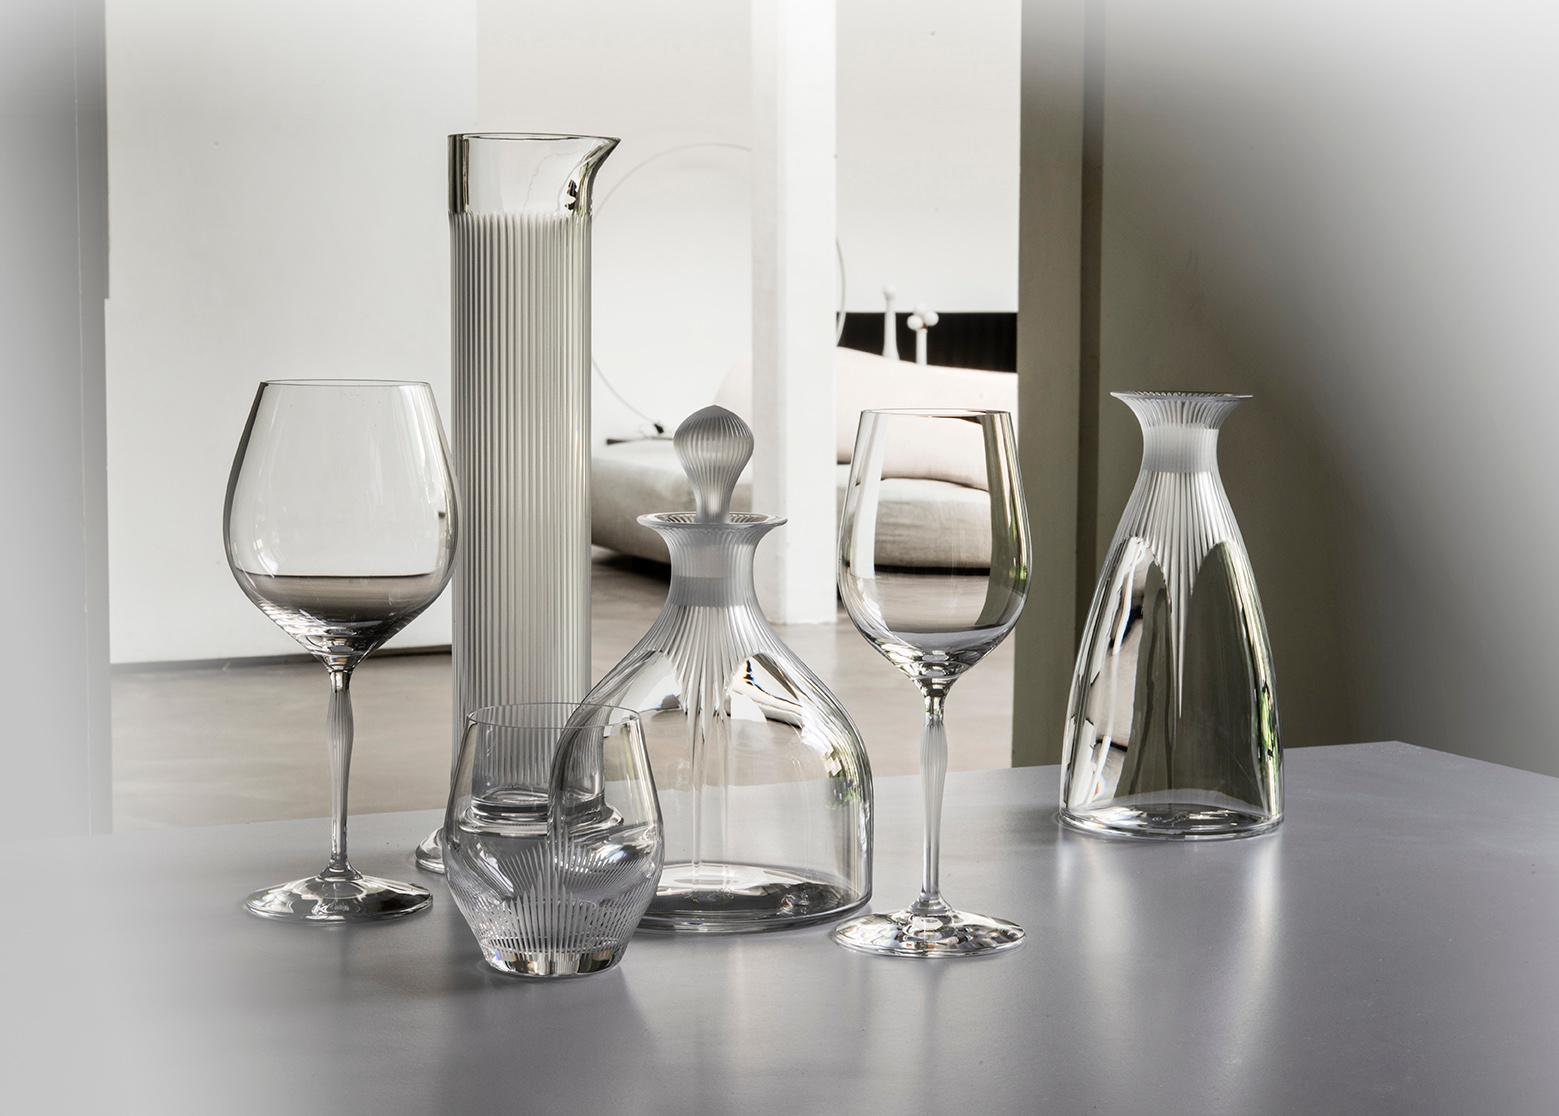 “Beautiful yet functional” is how internationally acclaimed wine critic James Suckling describes the 100 POINTS collection. 

With a name referring to the wine scoring system, 100 Points embraces a modern design and precise utility while